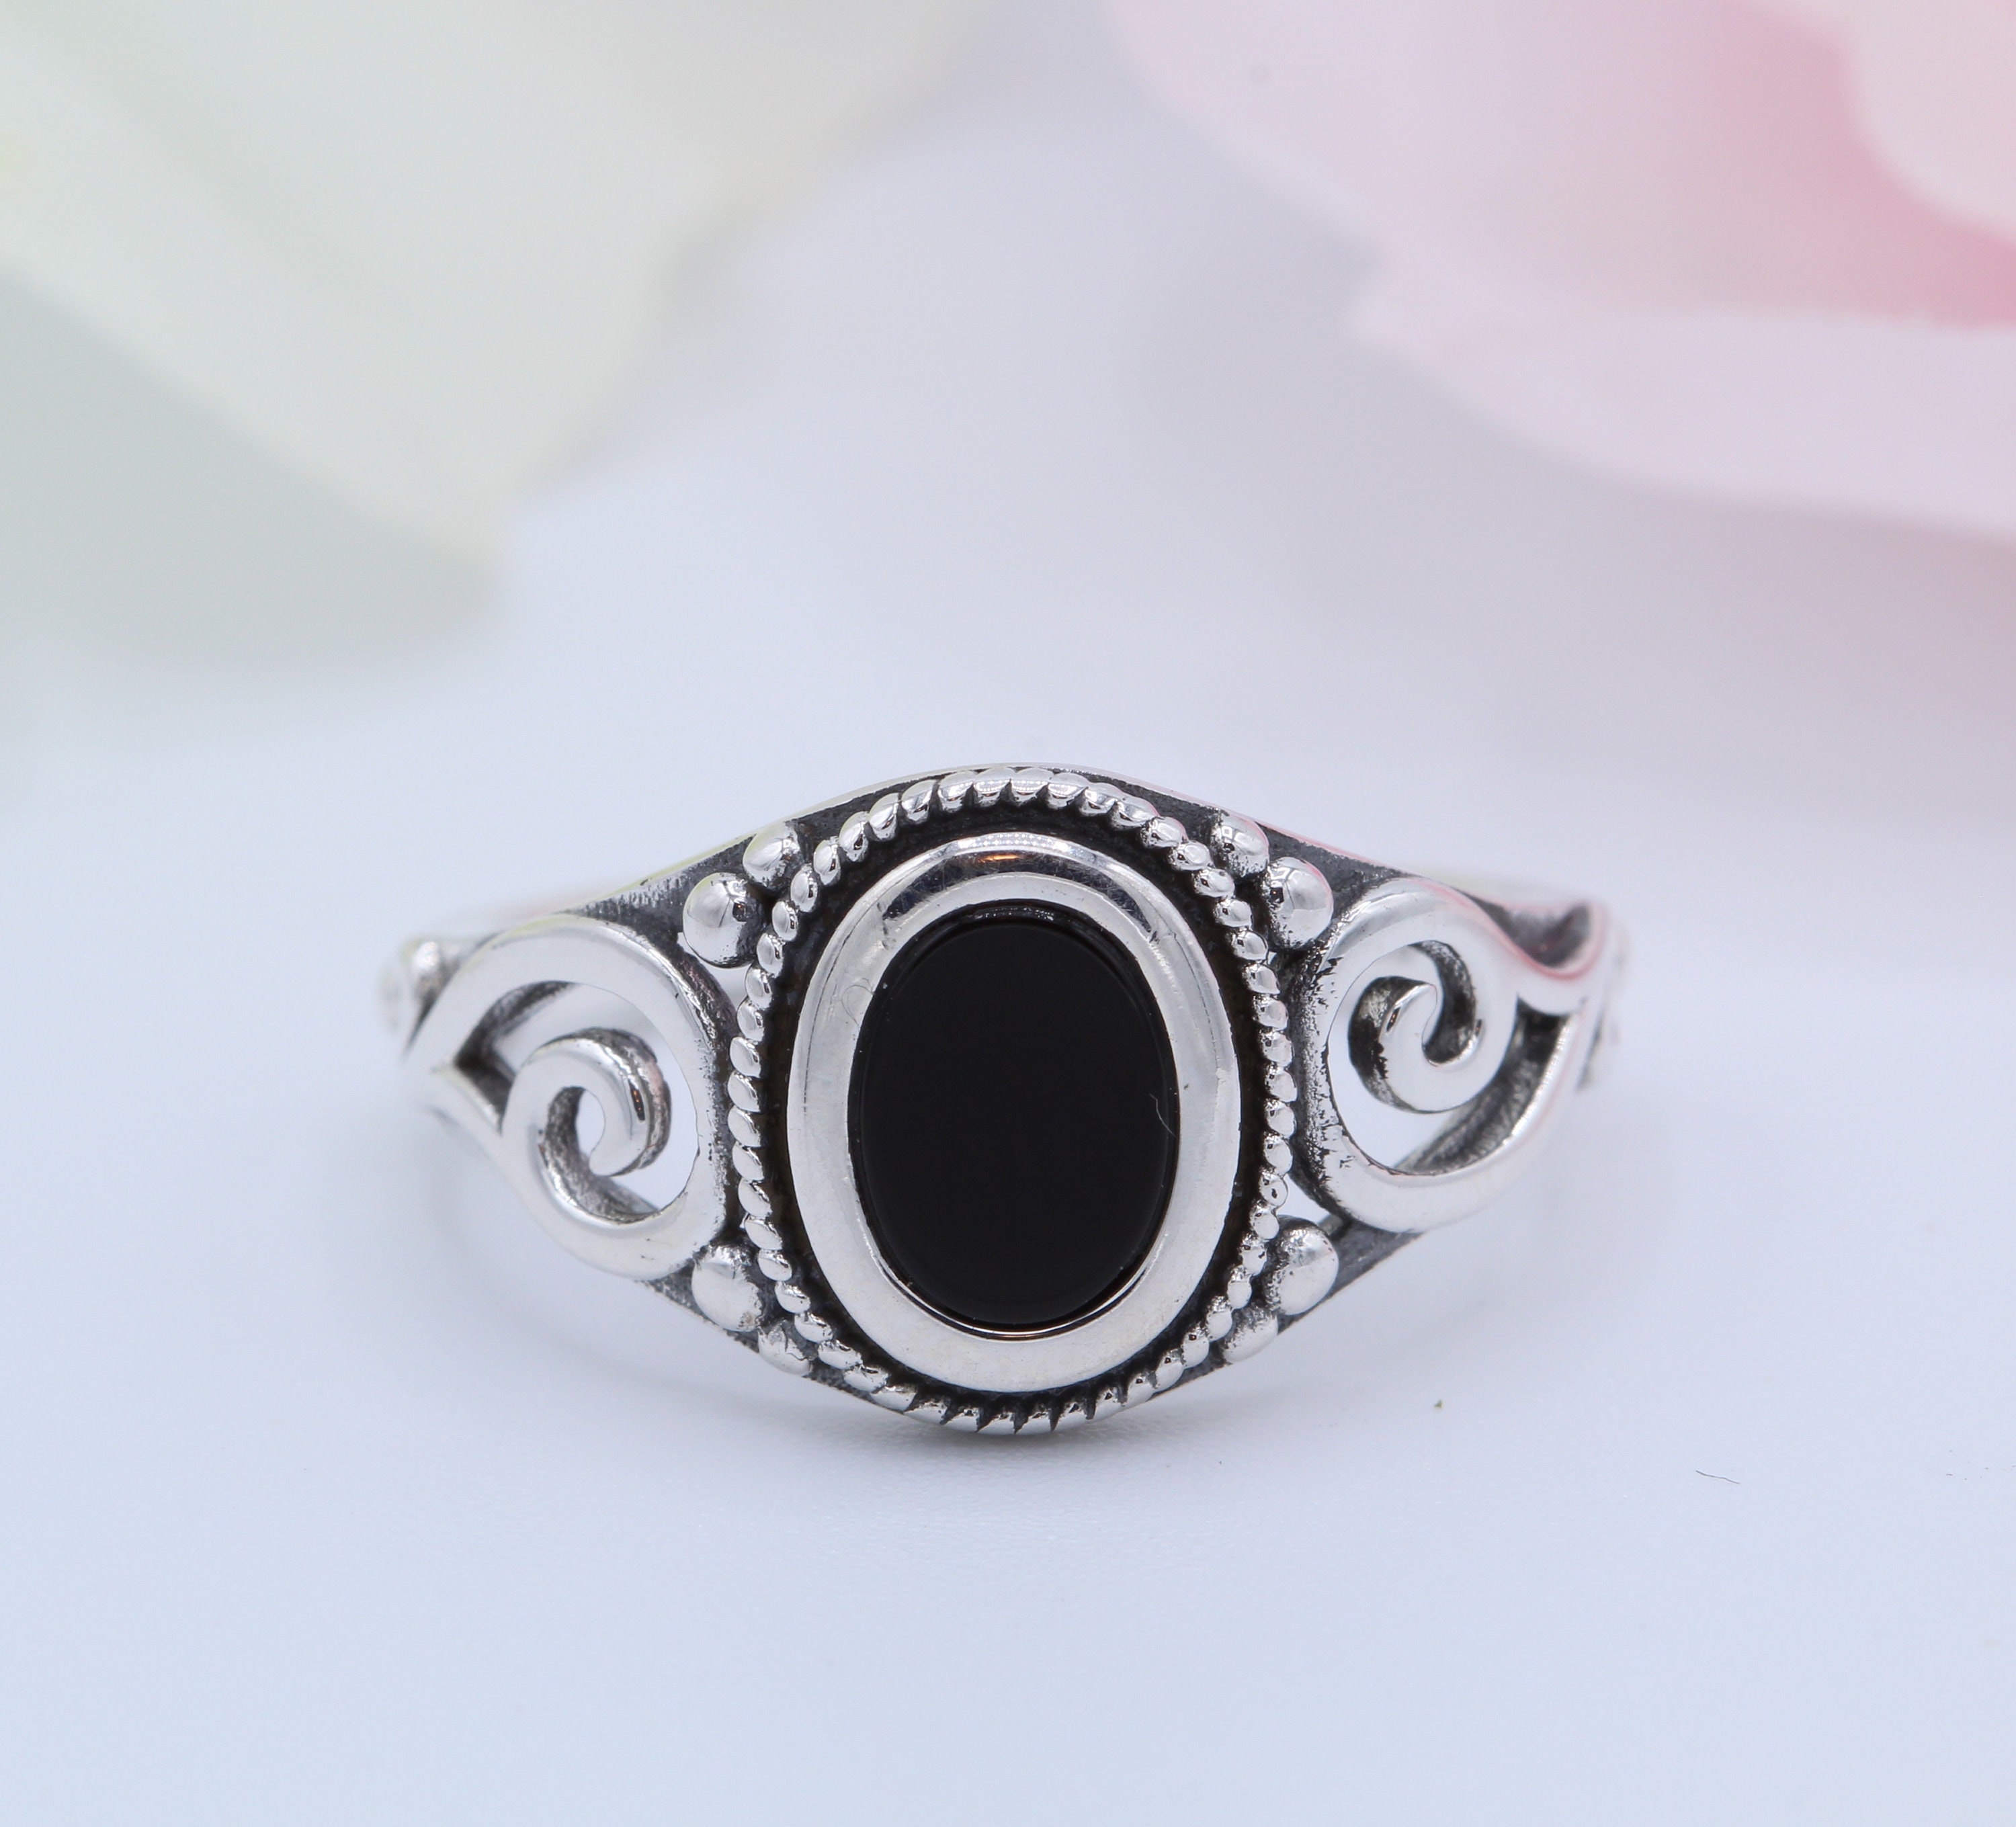 8mm Oval Black Onyx Ring Solid 925 Sterling Silver Filigree | Etsy